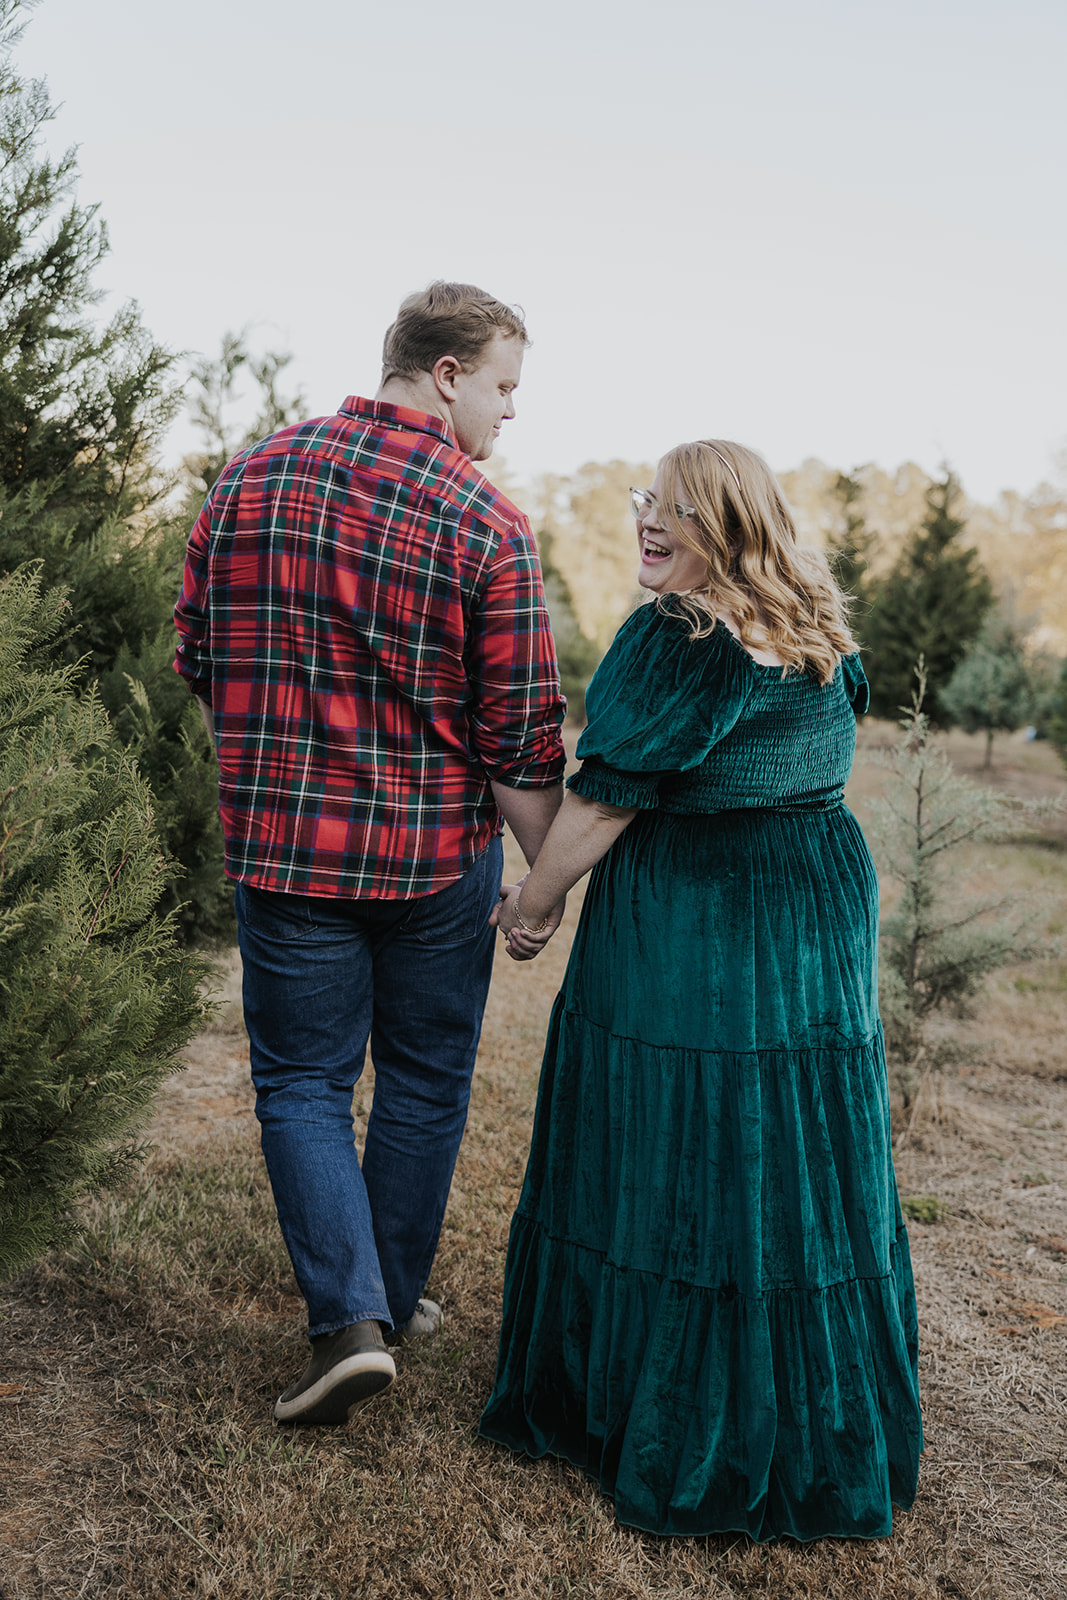 Beautiful walk holding hands sharing a laugh during their Christmas tree farm family photos